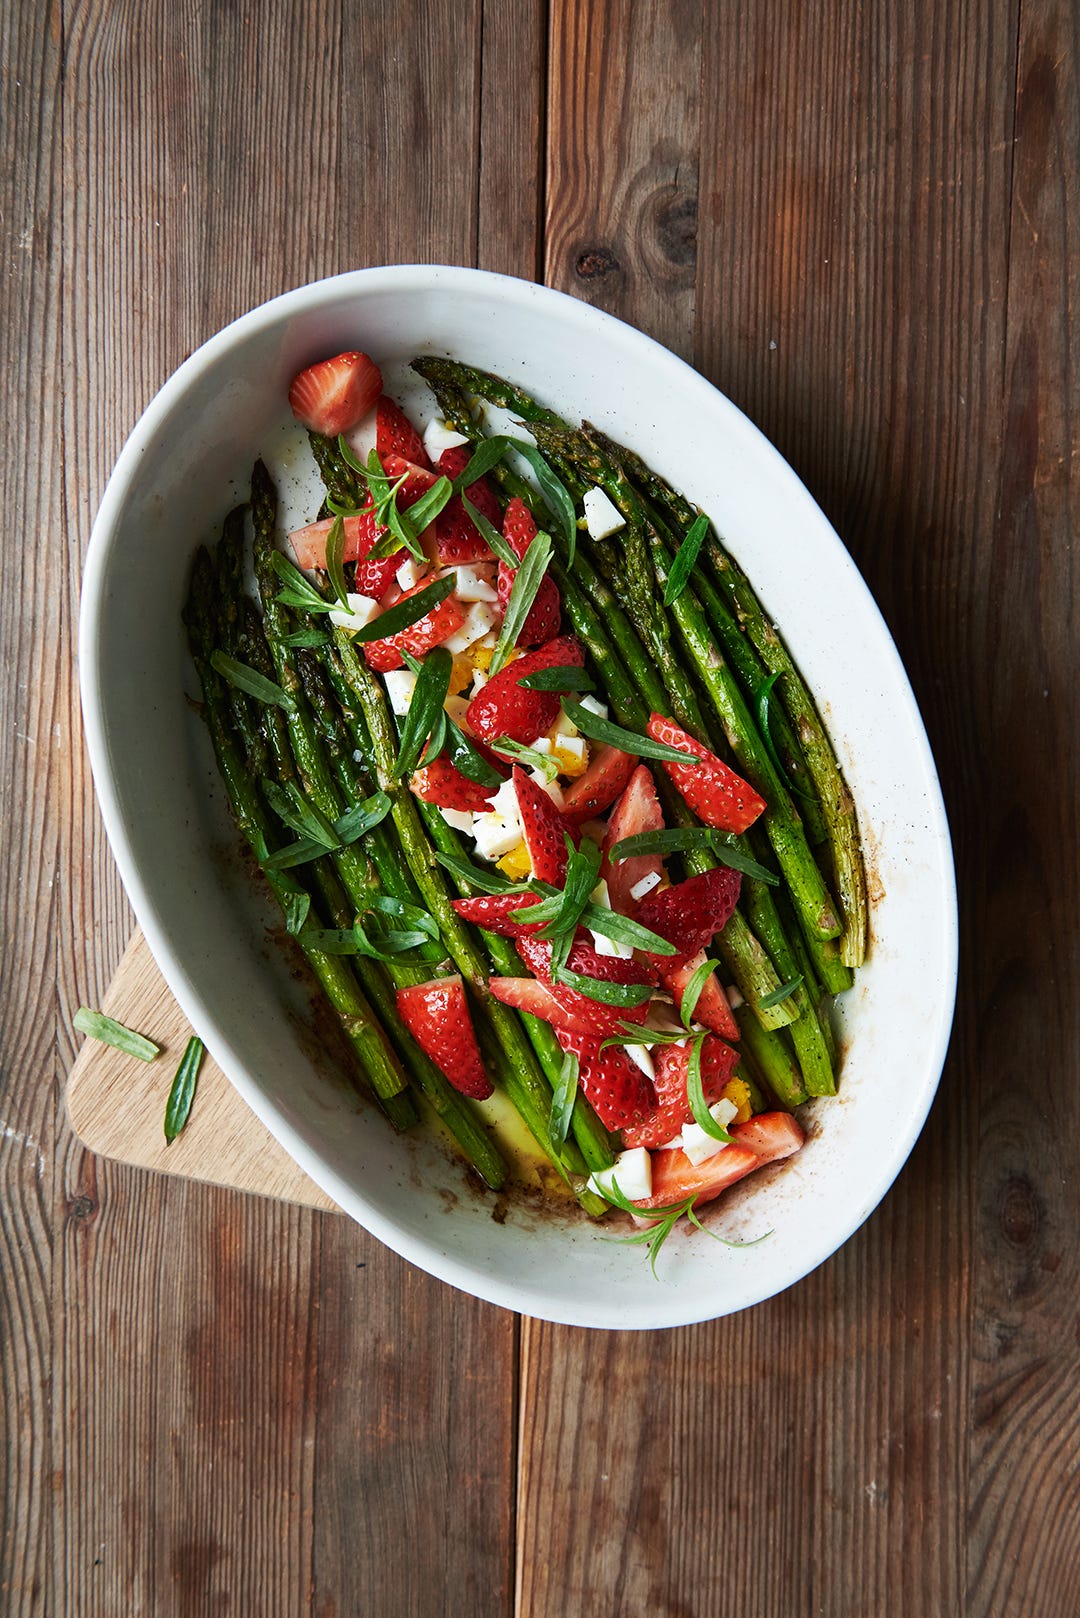 Roasted Asparagus with Strawberries, Tarragon, and Crumbled Eggs